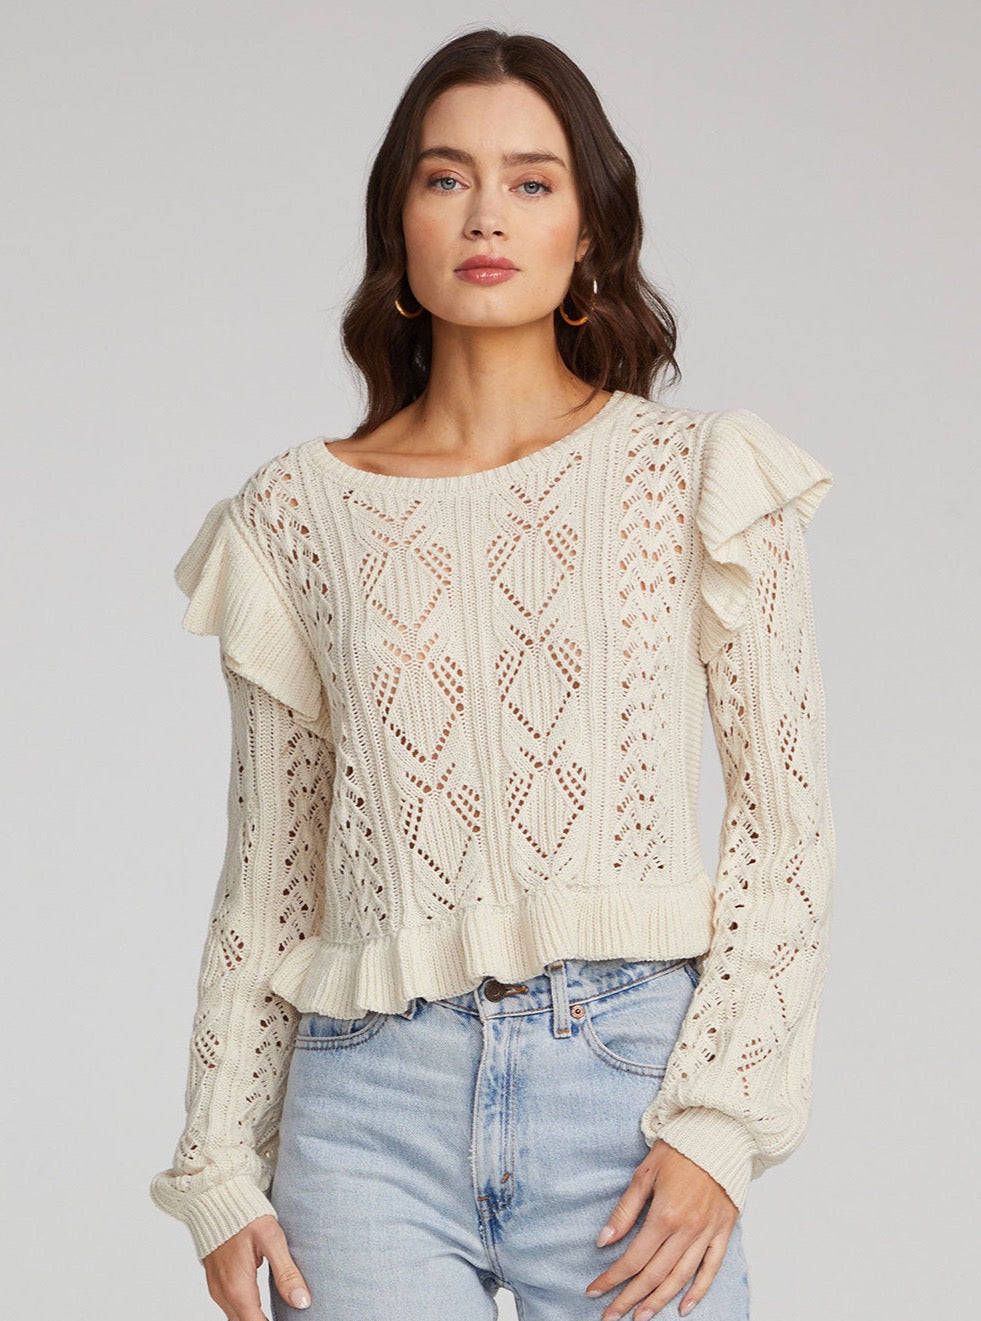 Saltwater Luxe Crochet Knit Sweater with Ruffles - Size S Available